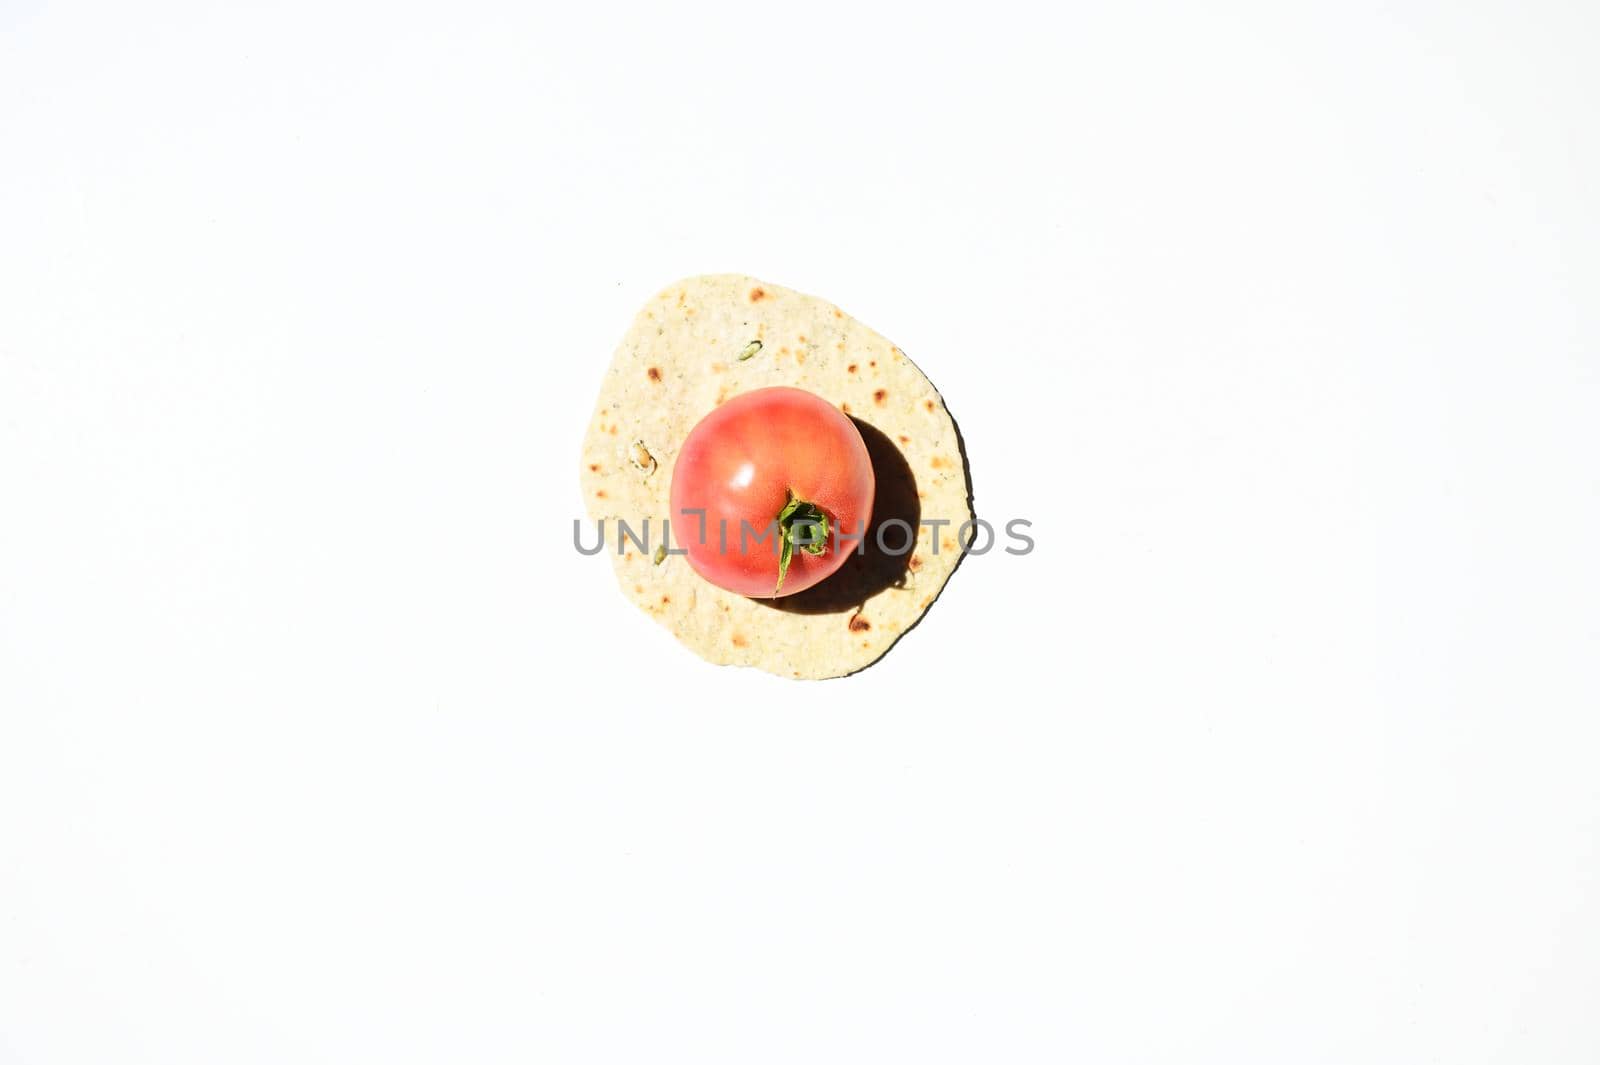 Flat lay of ripe juicy tomato on a freshly baked homemade chapati, pita bread, flatbread, isolated over white background by artgf